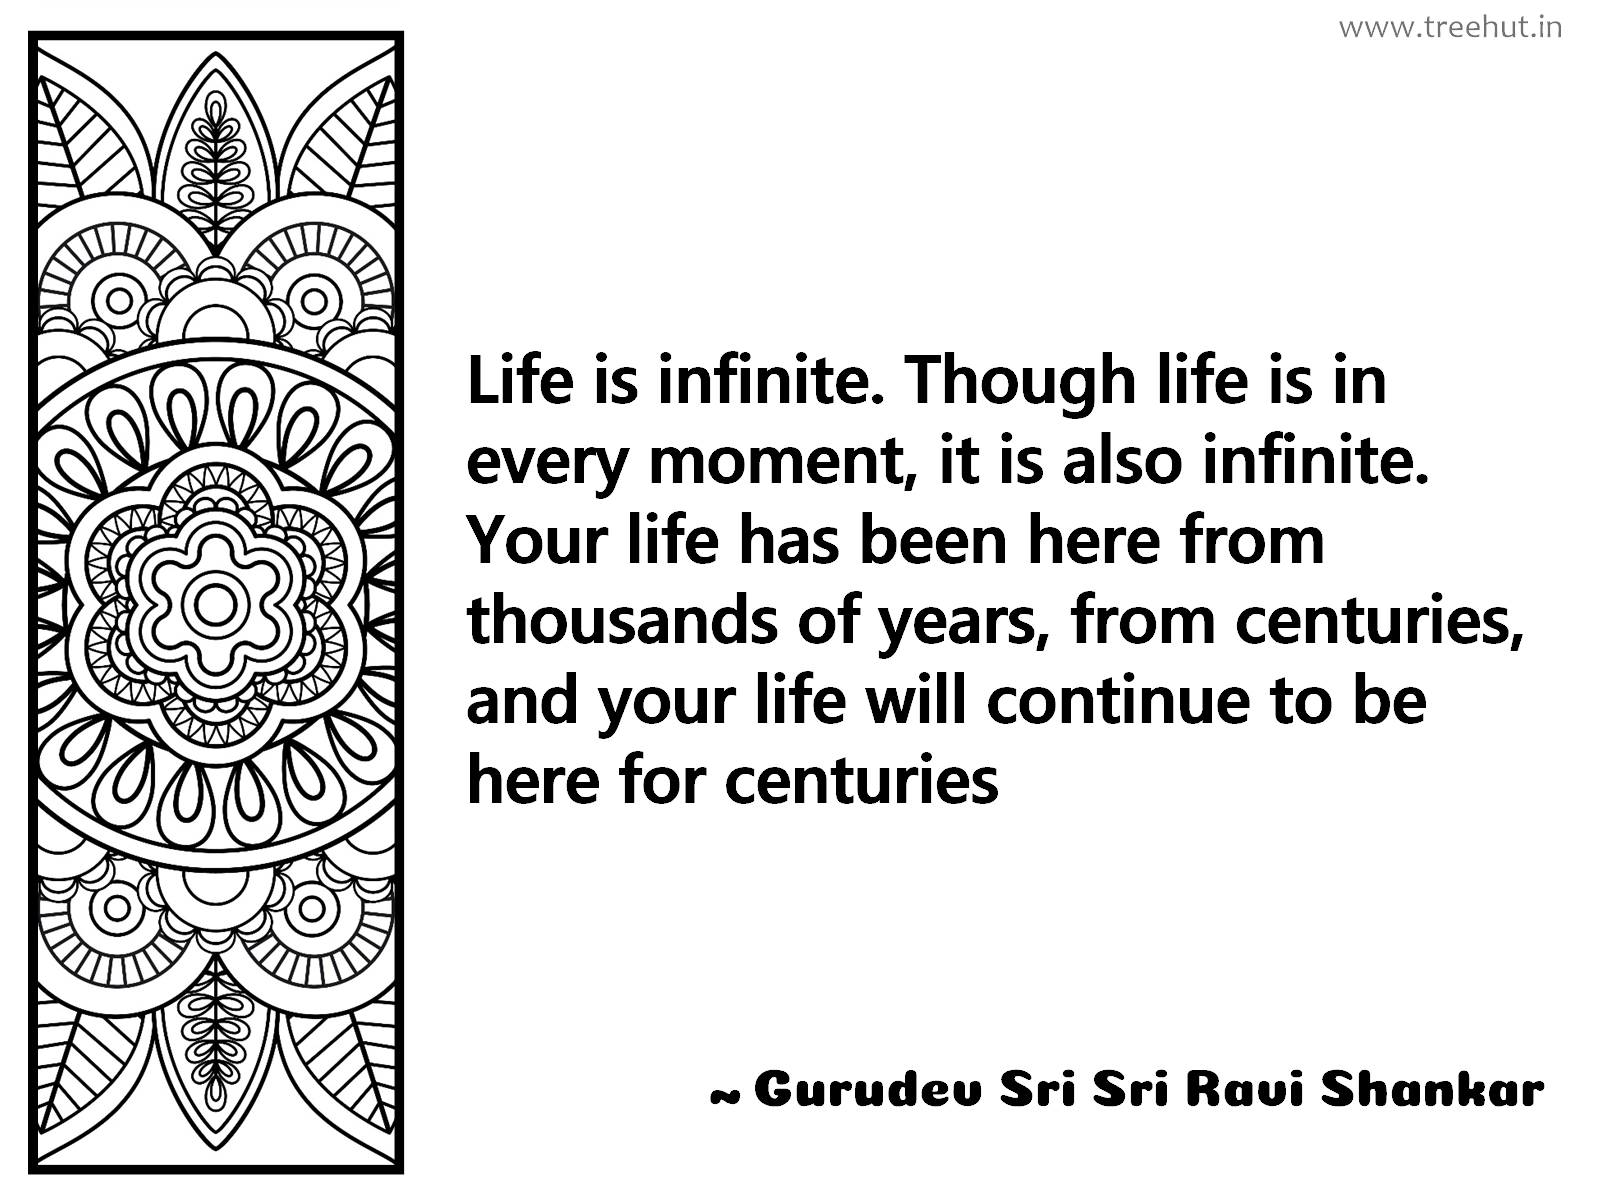 Life is infinite. Though life is in every moment, it is also infinite. Your life has been here from thousands of years, from centuries, and your life will continue to be here for centuries Inspirational Quote by Gurudev Sri Sri Ravi Shankar, coloring pages